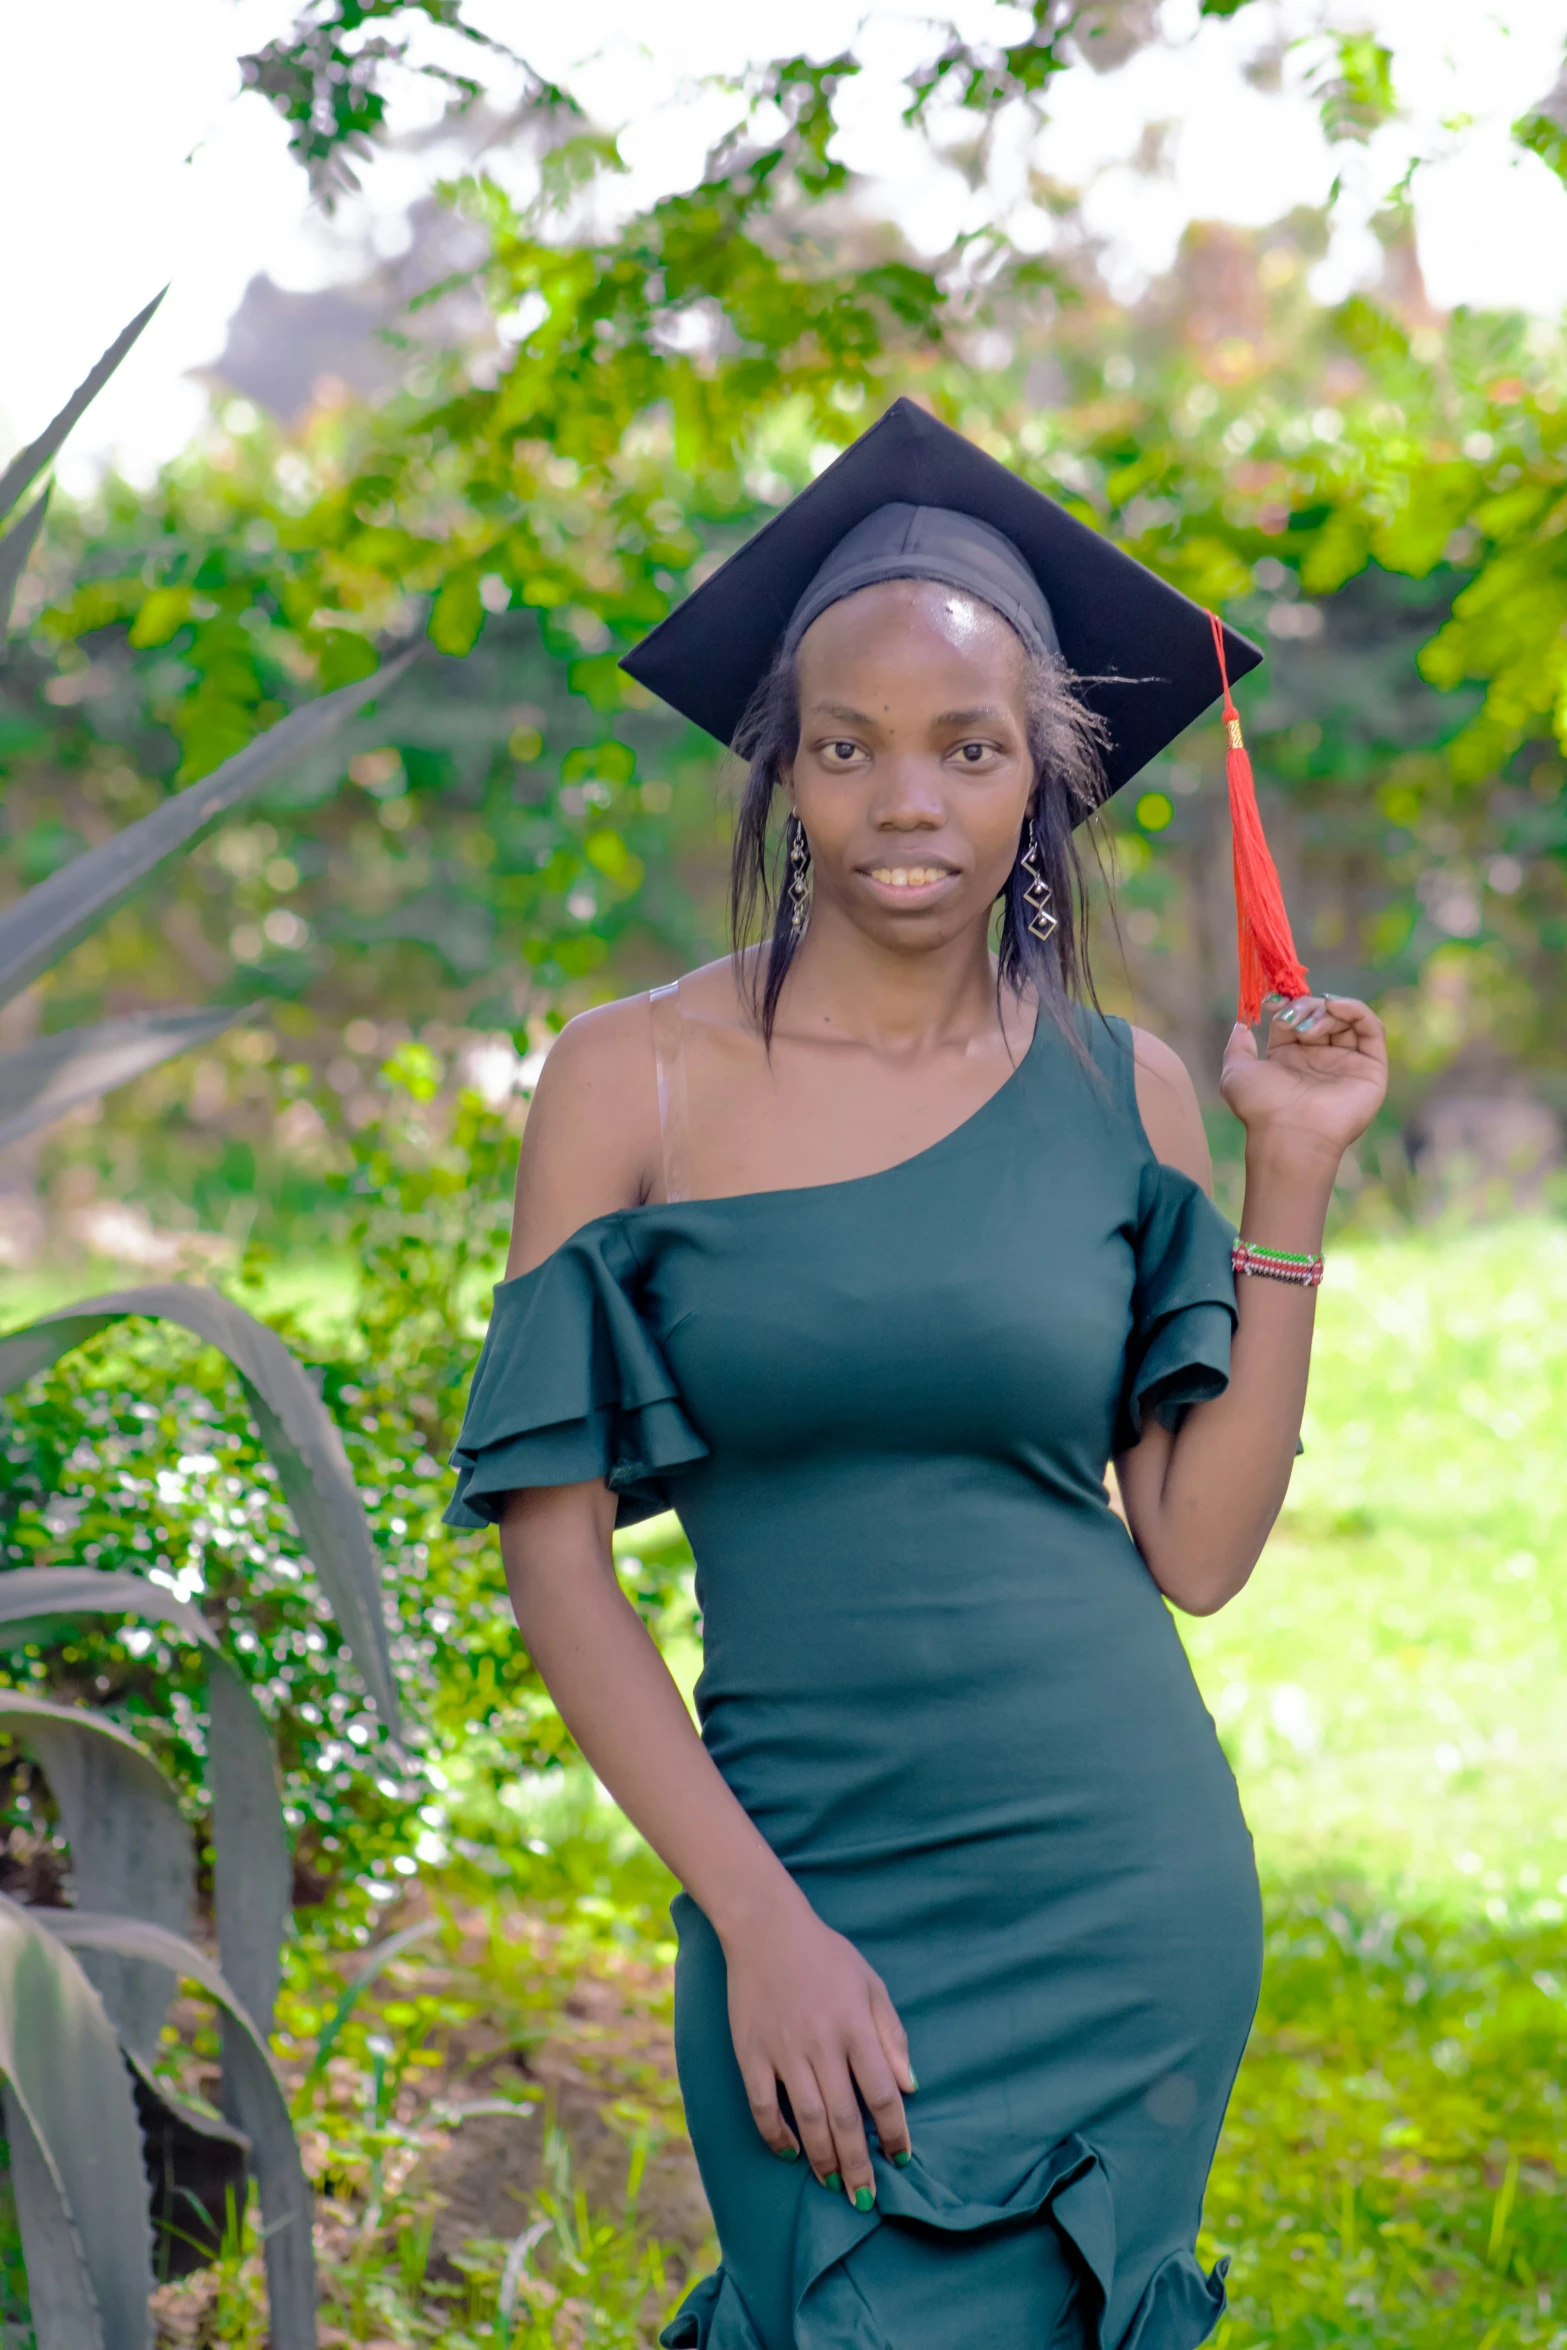 a woman is posing with a graduation cap